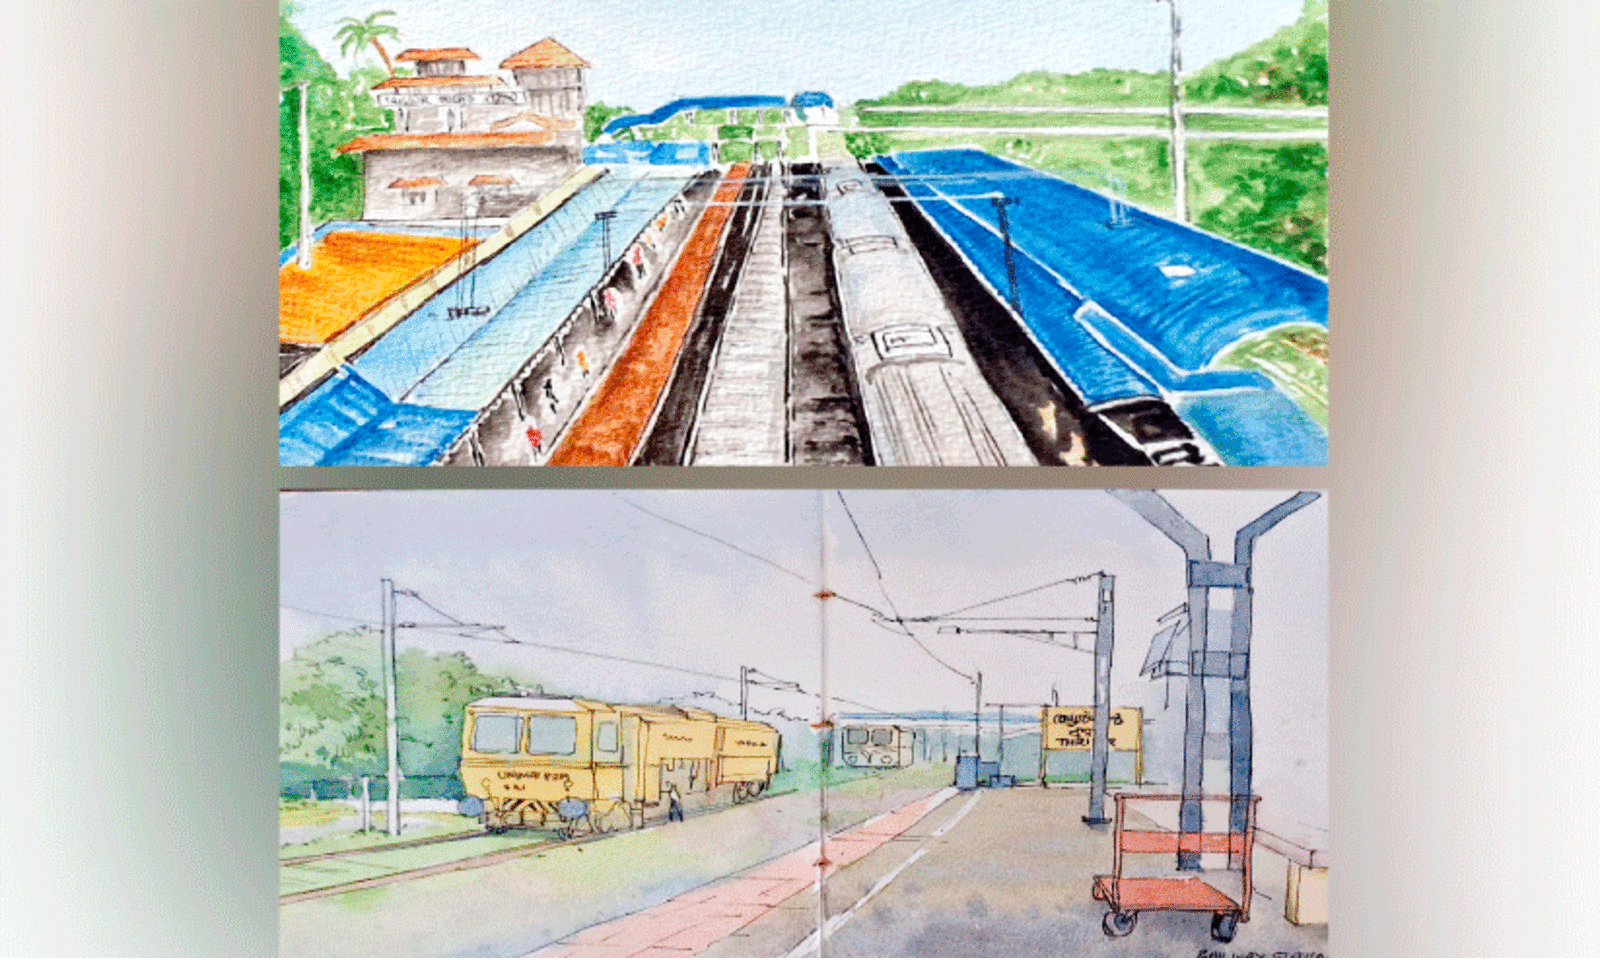 Mini Watercolor Drawings of a Railway Station